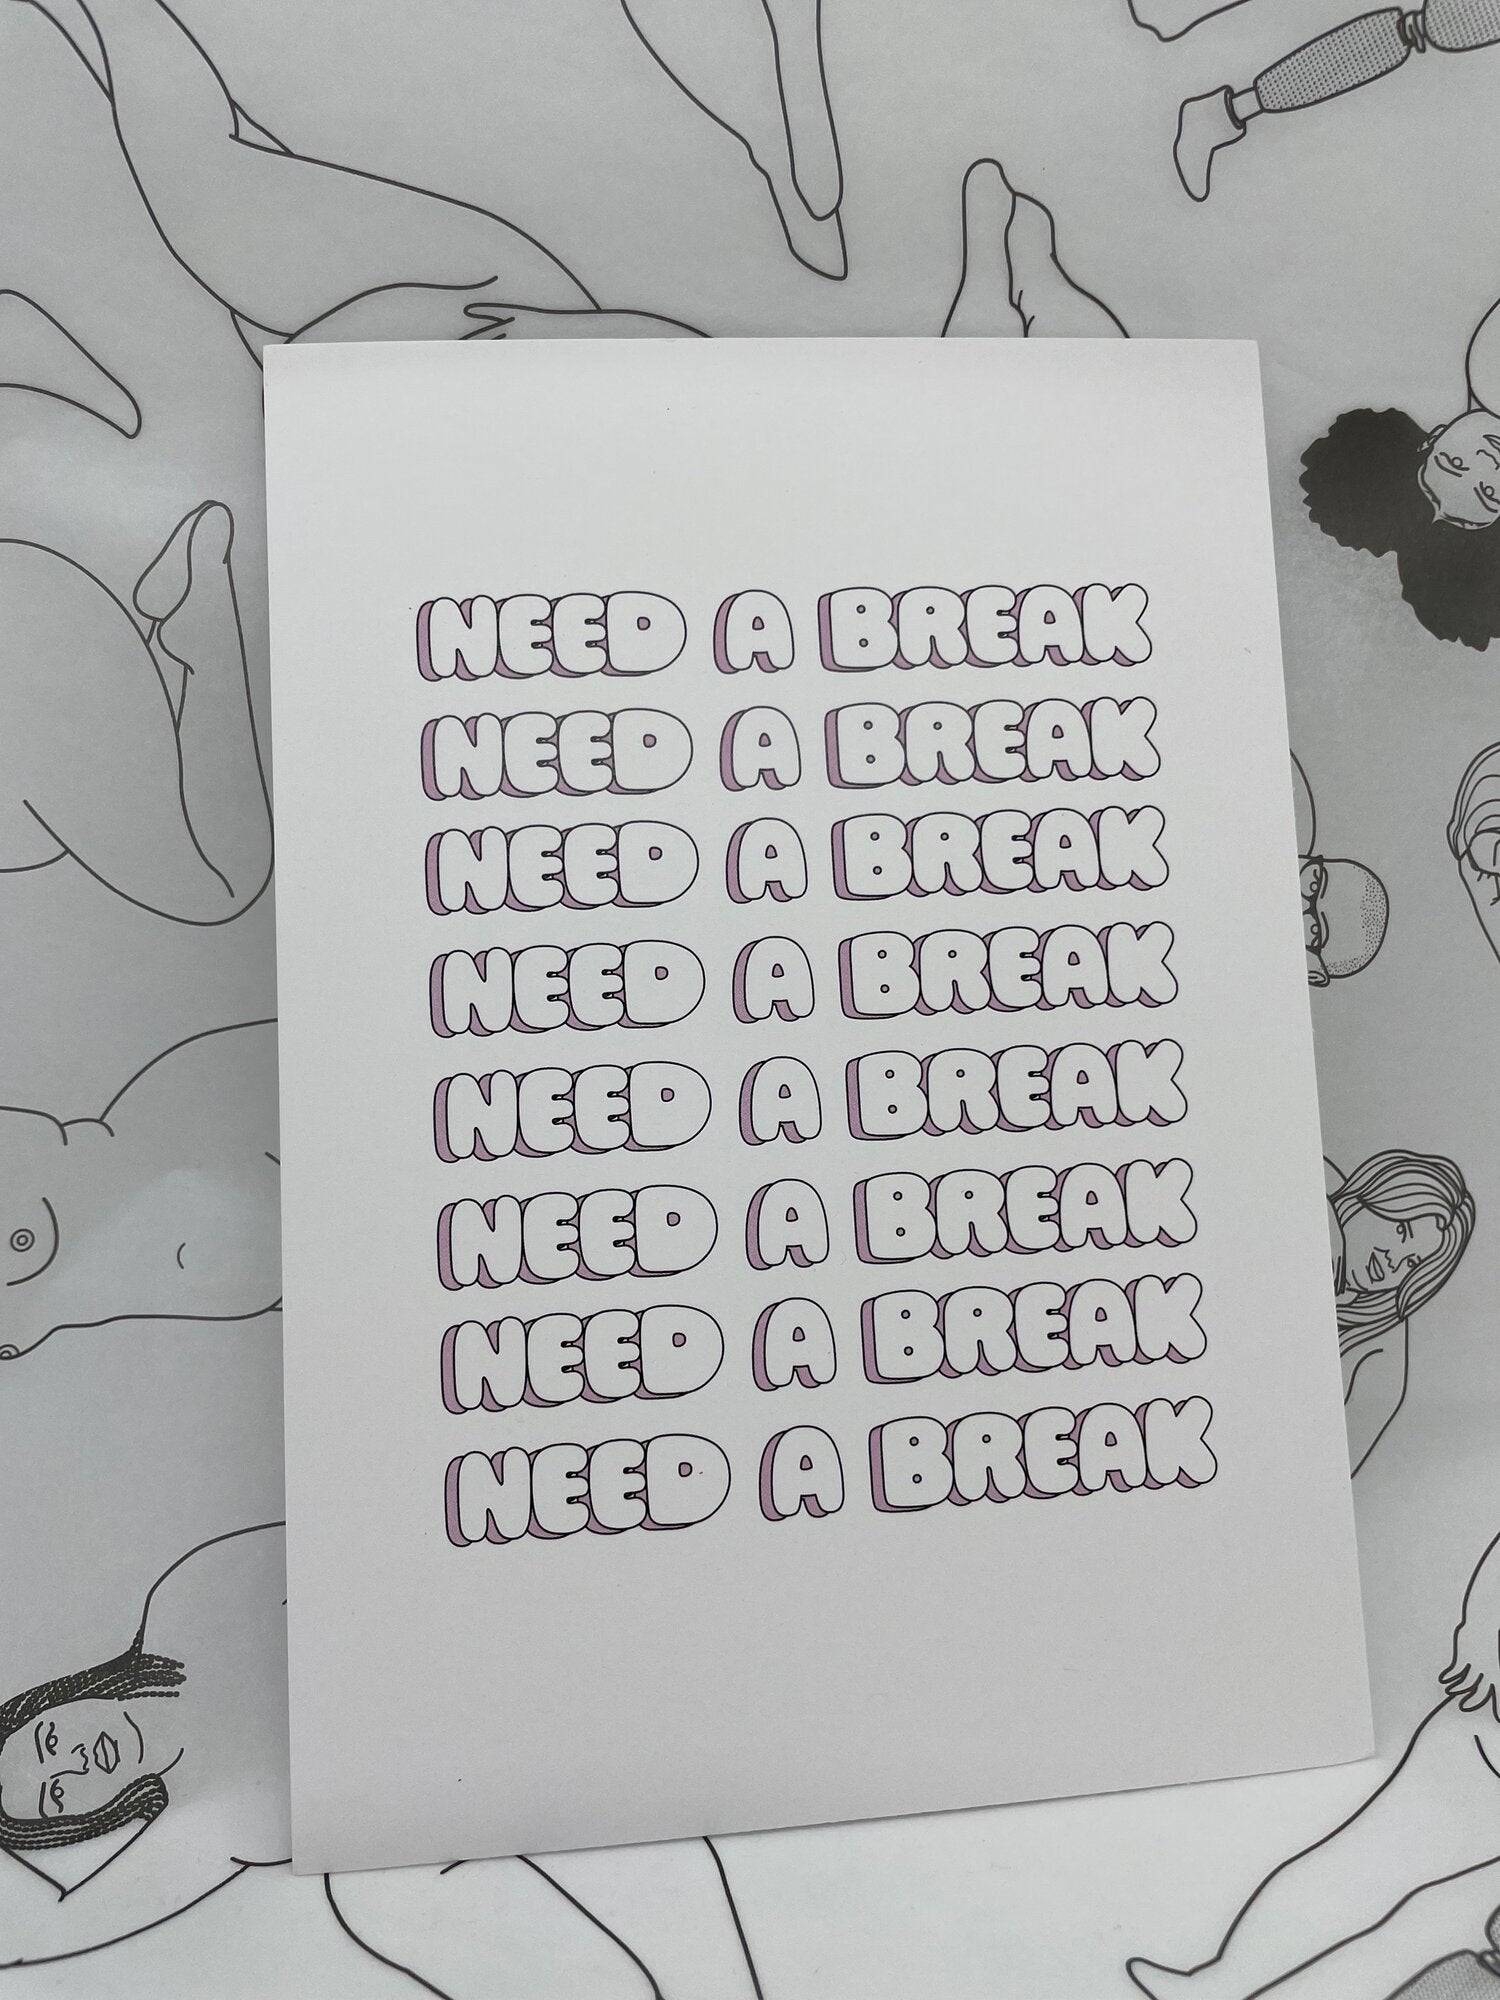 Art print with white back ground that says need a break repeating 